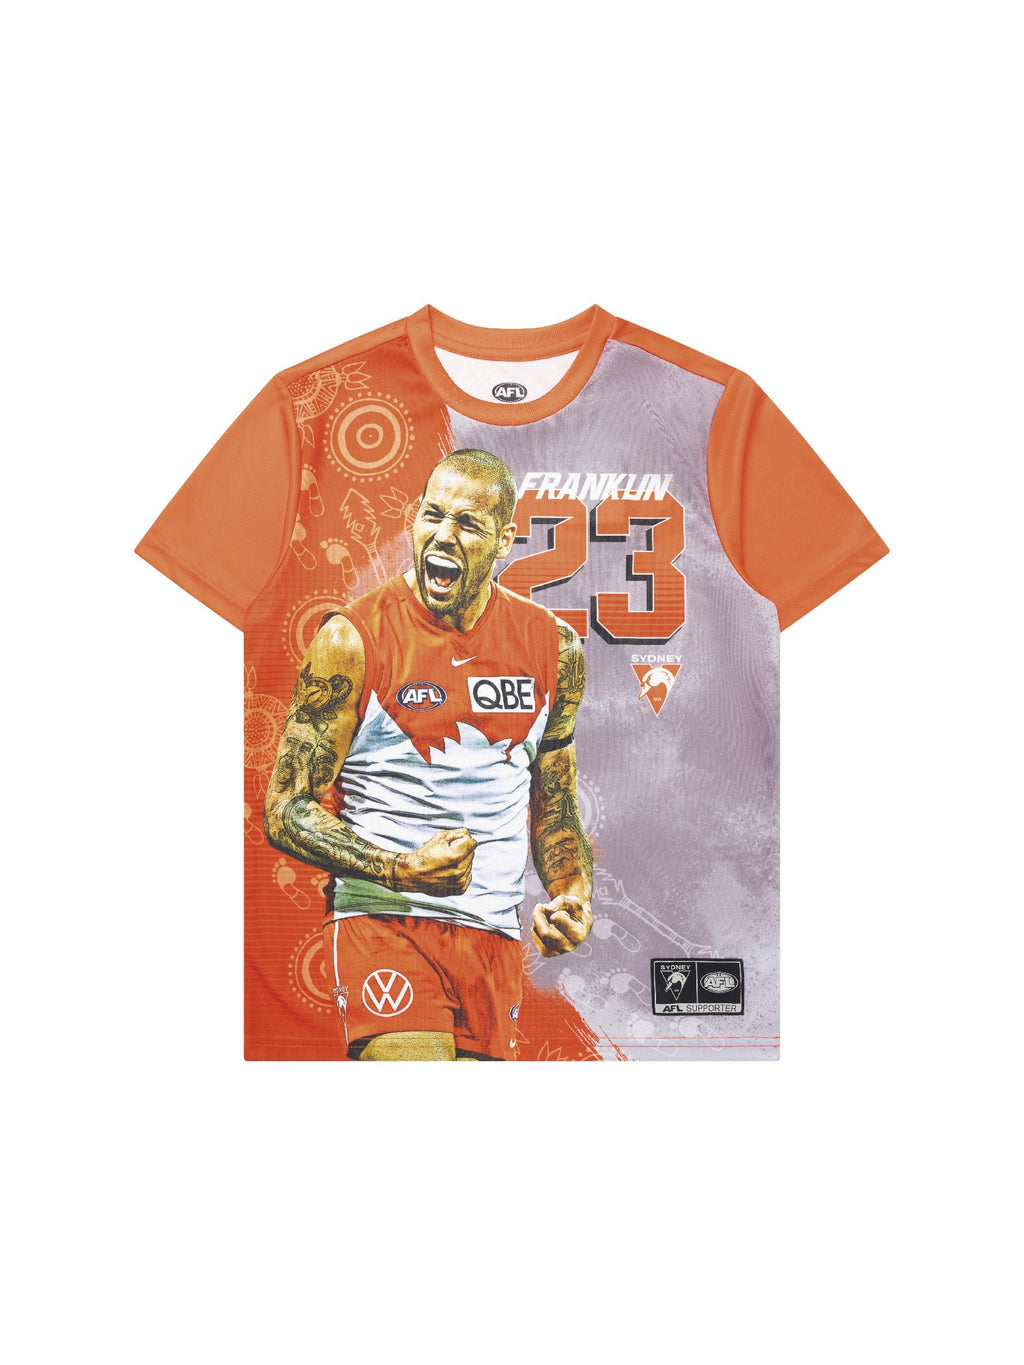 Sydney Swans Youth Indigenous Player Tee - Lance "Buddy" Franklin